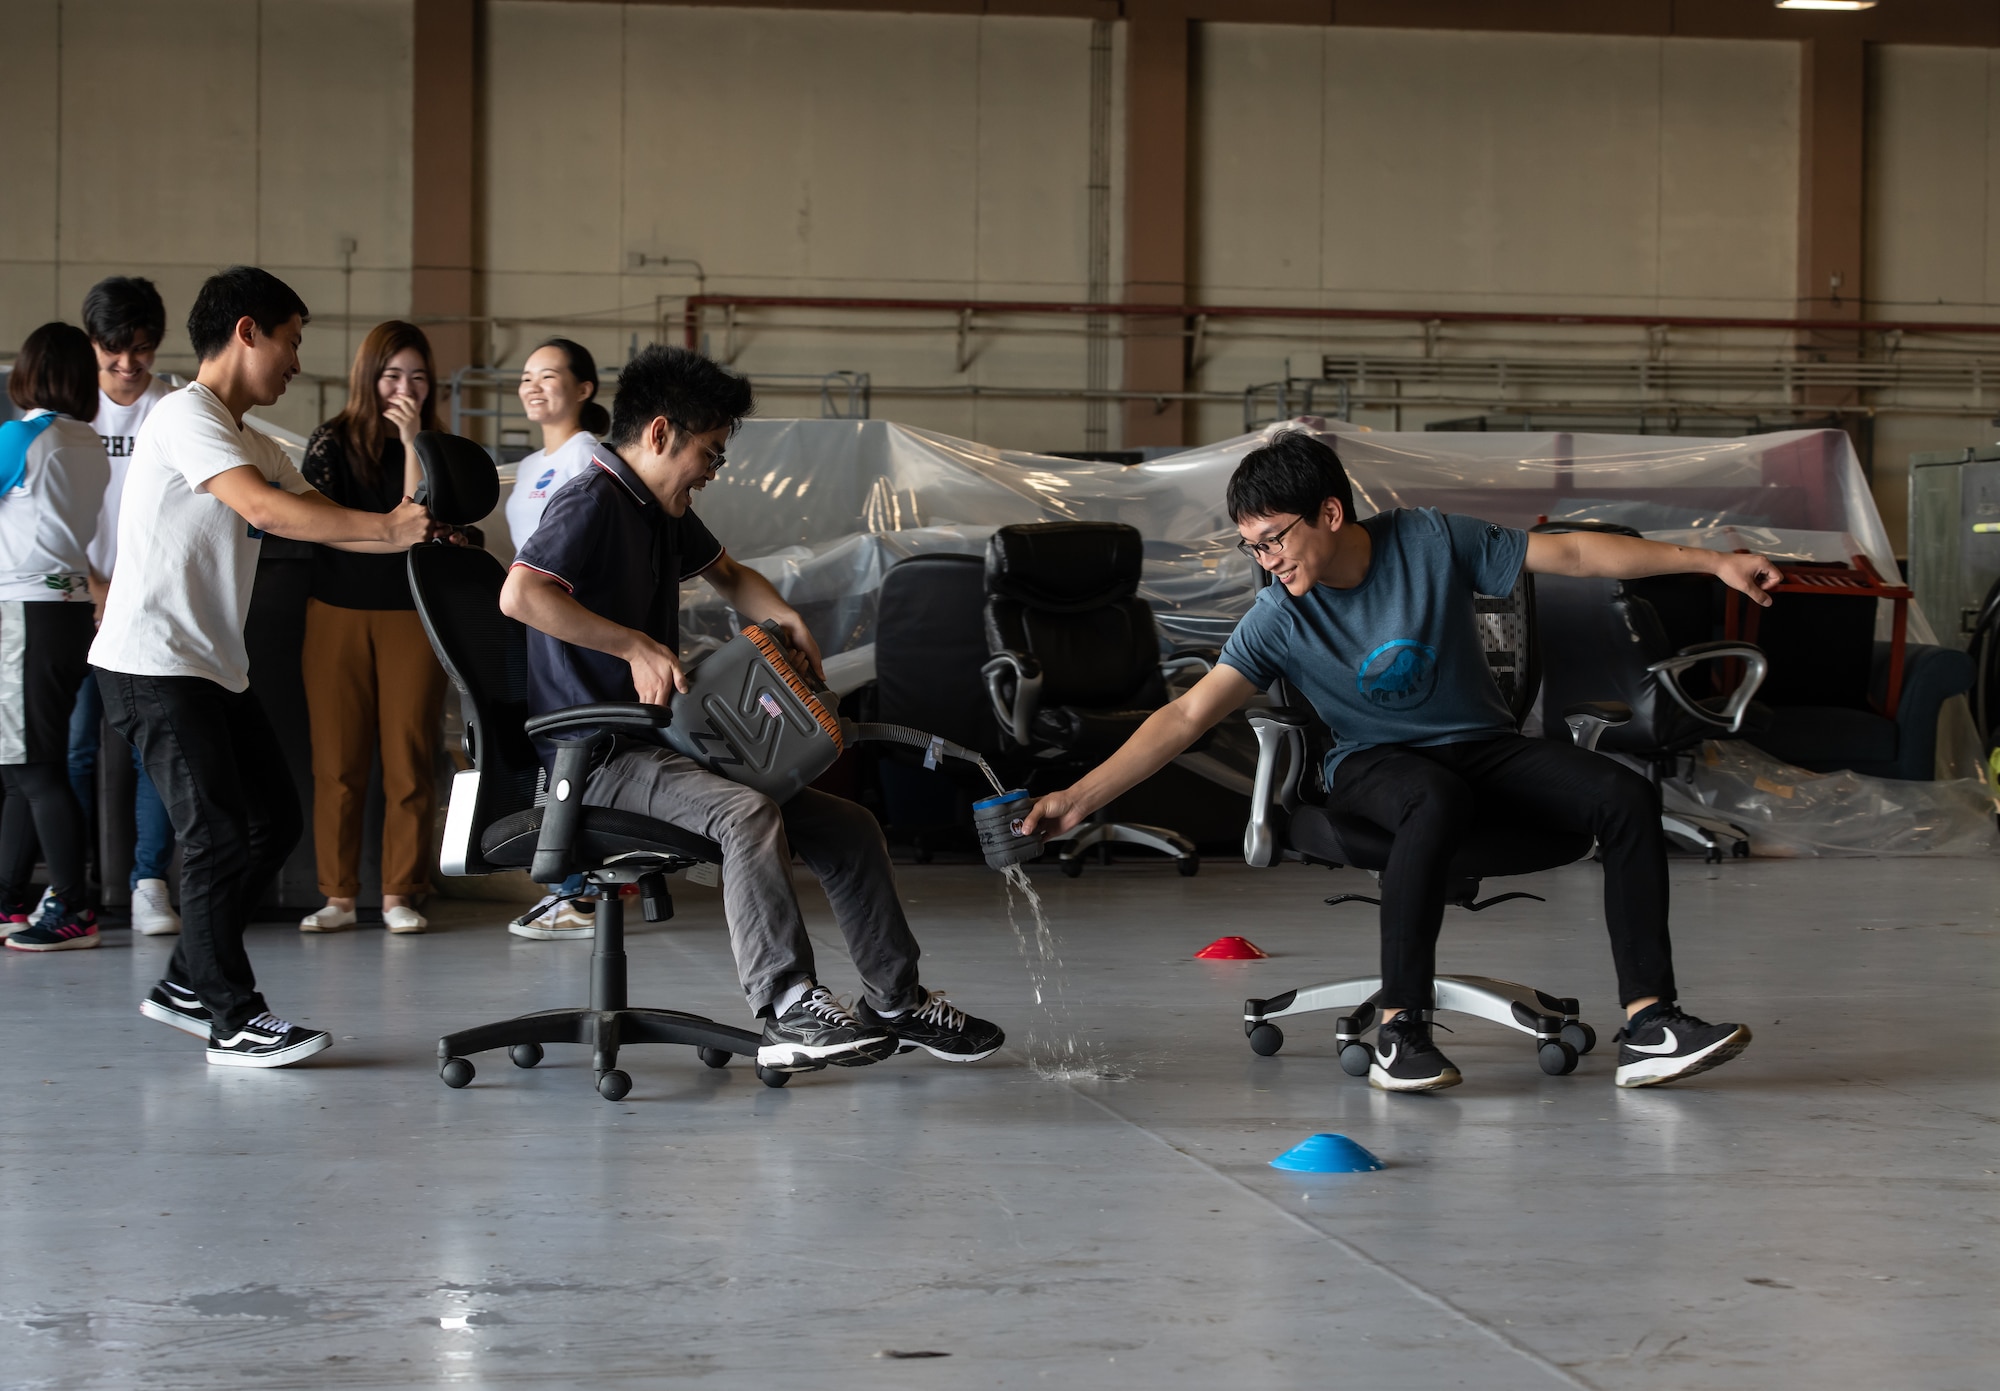 University students participate in an interactive challenge during Air Force Immersion Day, Sept. 23, 2019, at Kadena Air Base, Japan. The challenge was designed to give students a better understanding of aerial refueling by having one student act as the pilot of a KC-135 Stratotanker by pulling another student, the boom operator, in an office chair while a third student follows and attempts to have their cup filled by the boom operator. (U.S. Air Force photo by Staff Sgt. Micaiah Anthony)